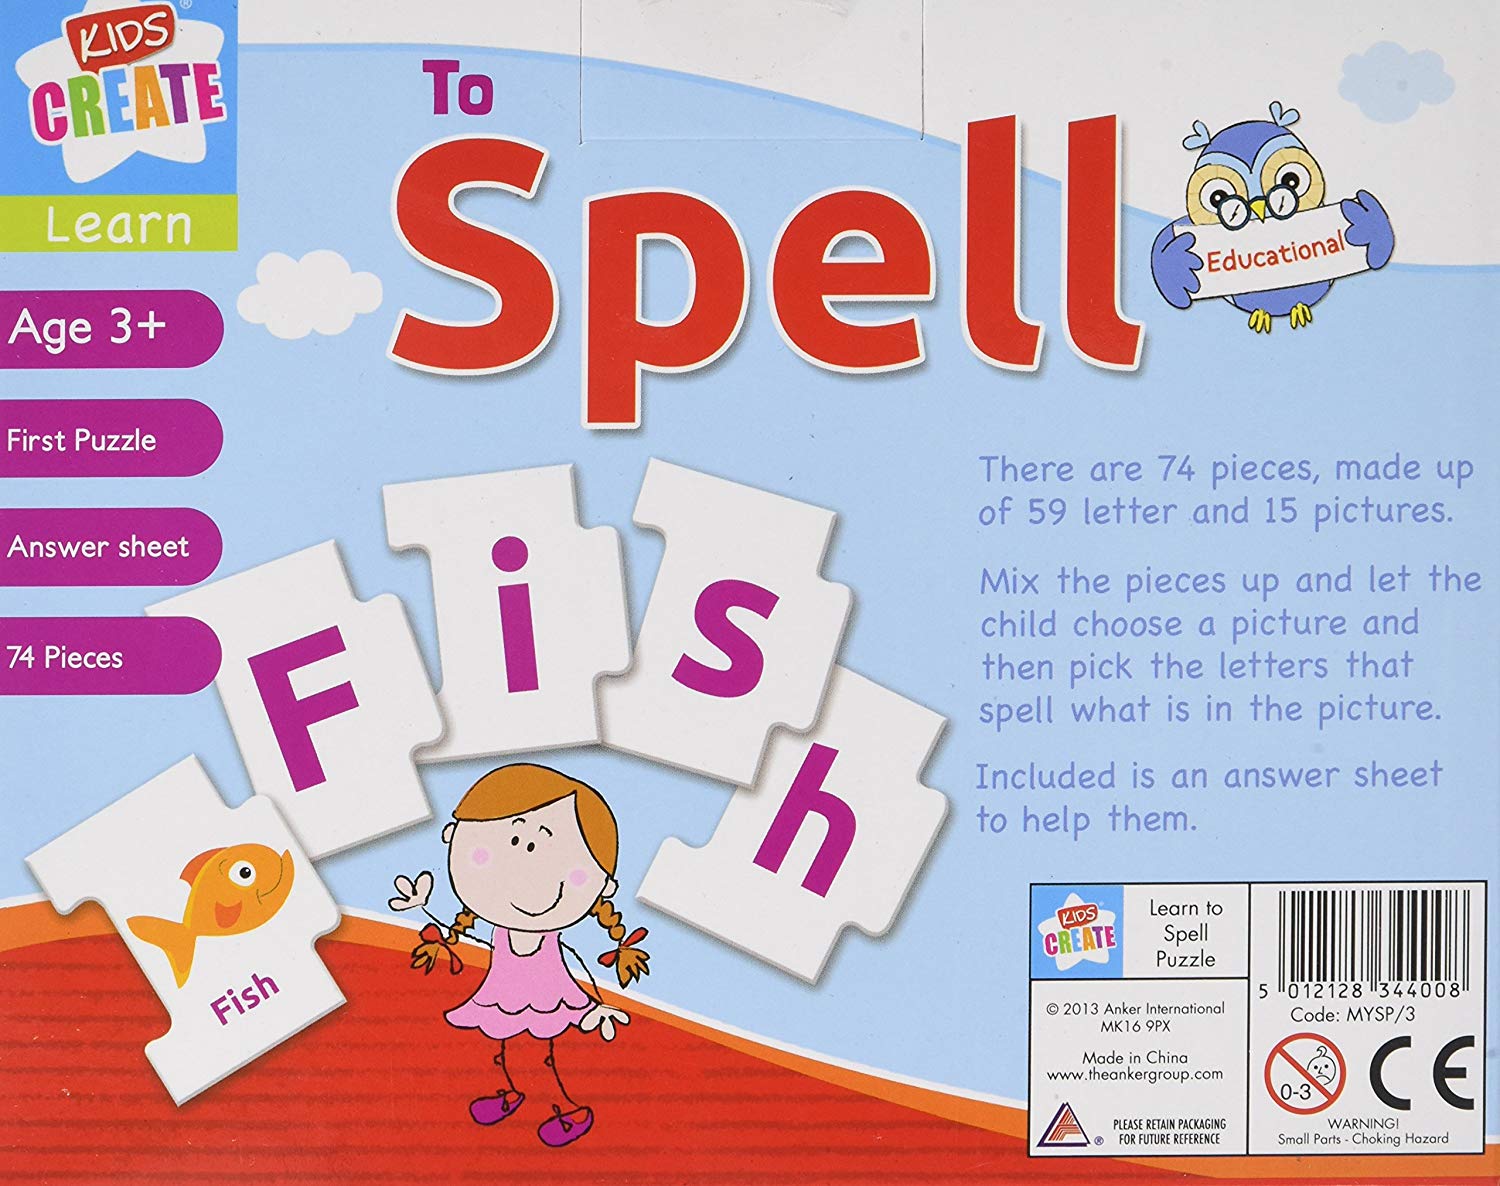 Learn-to-Spell-Educational-First-Puzzle-back.jpg